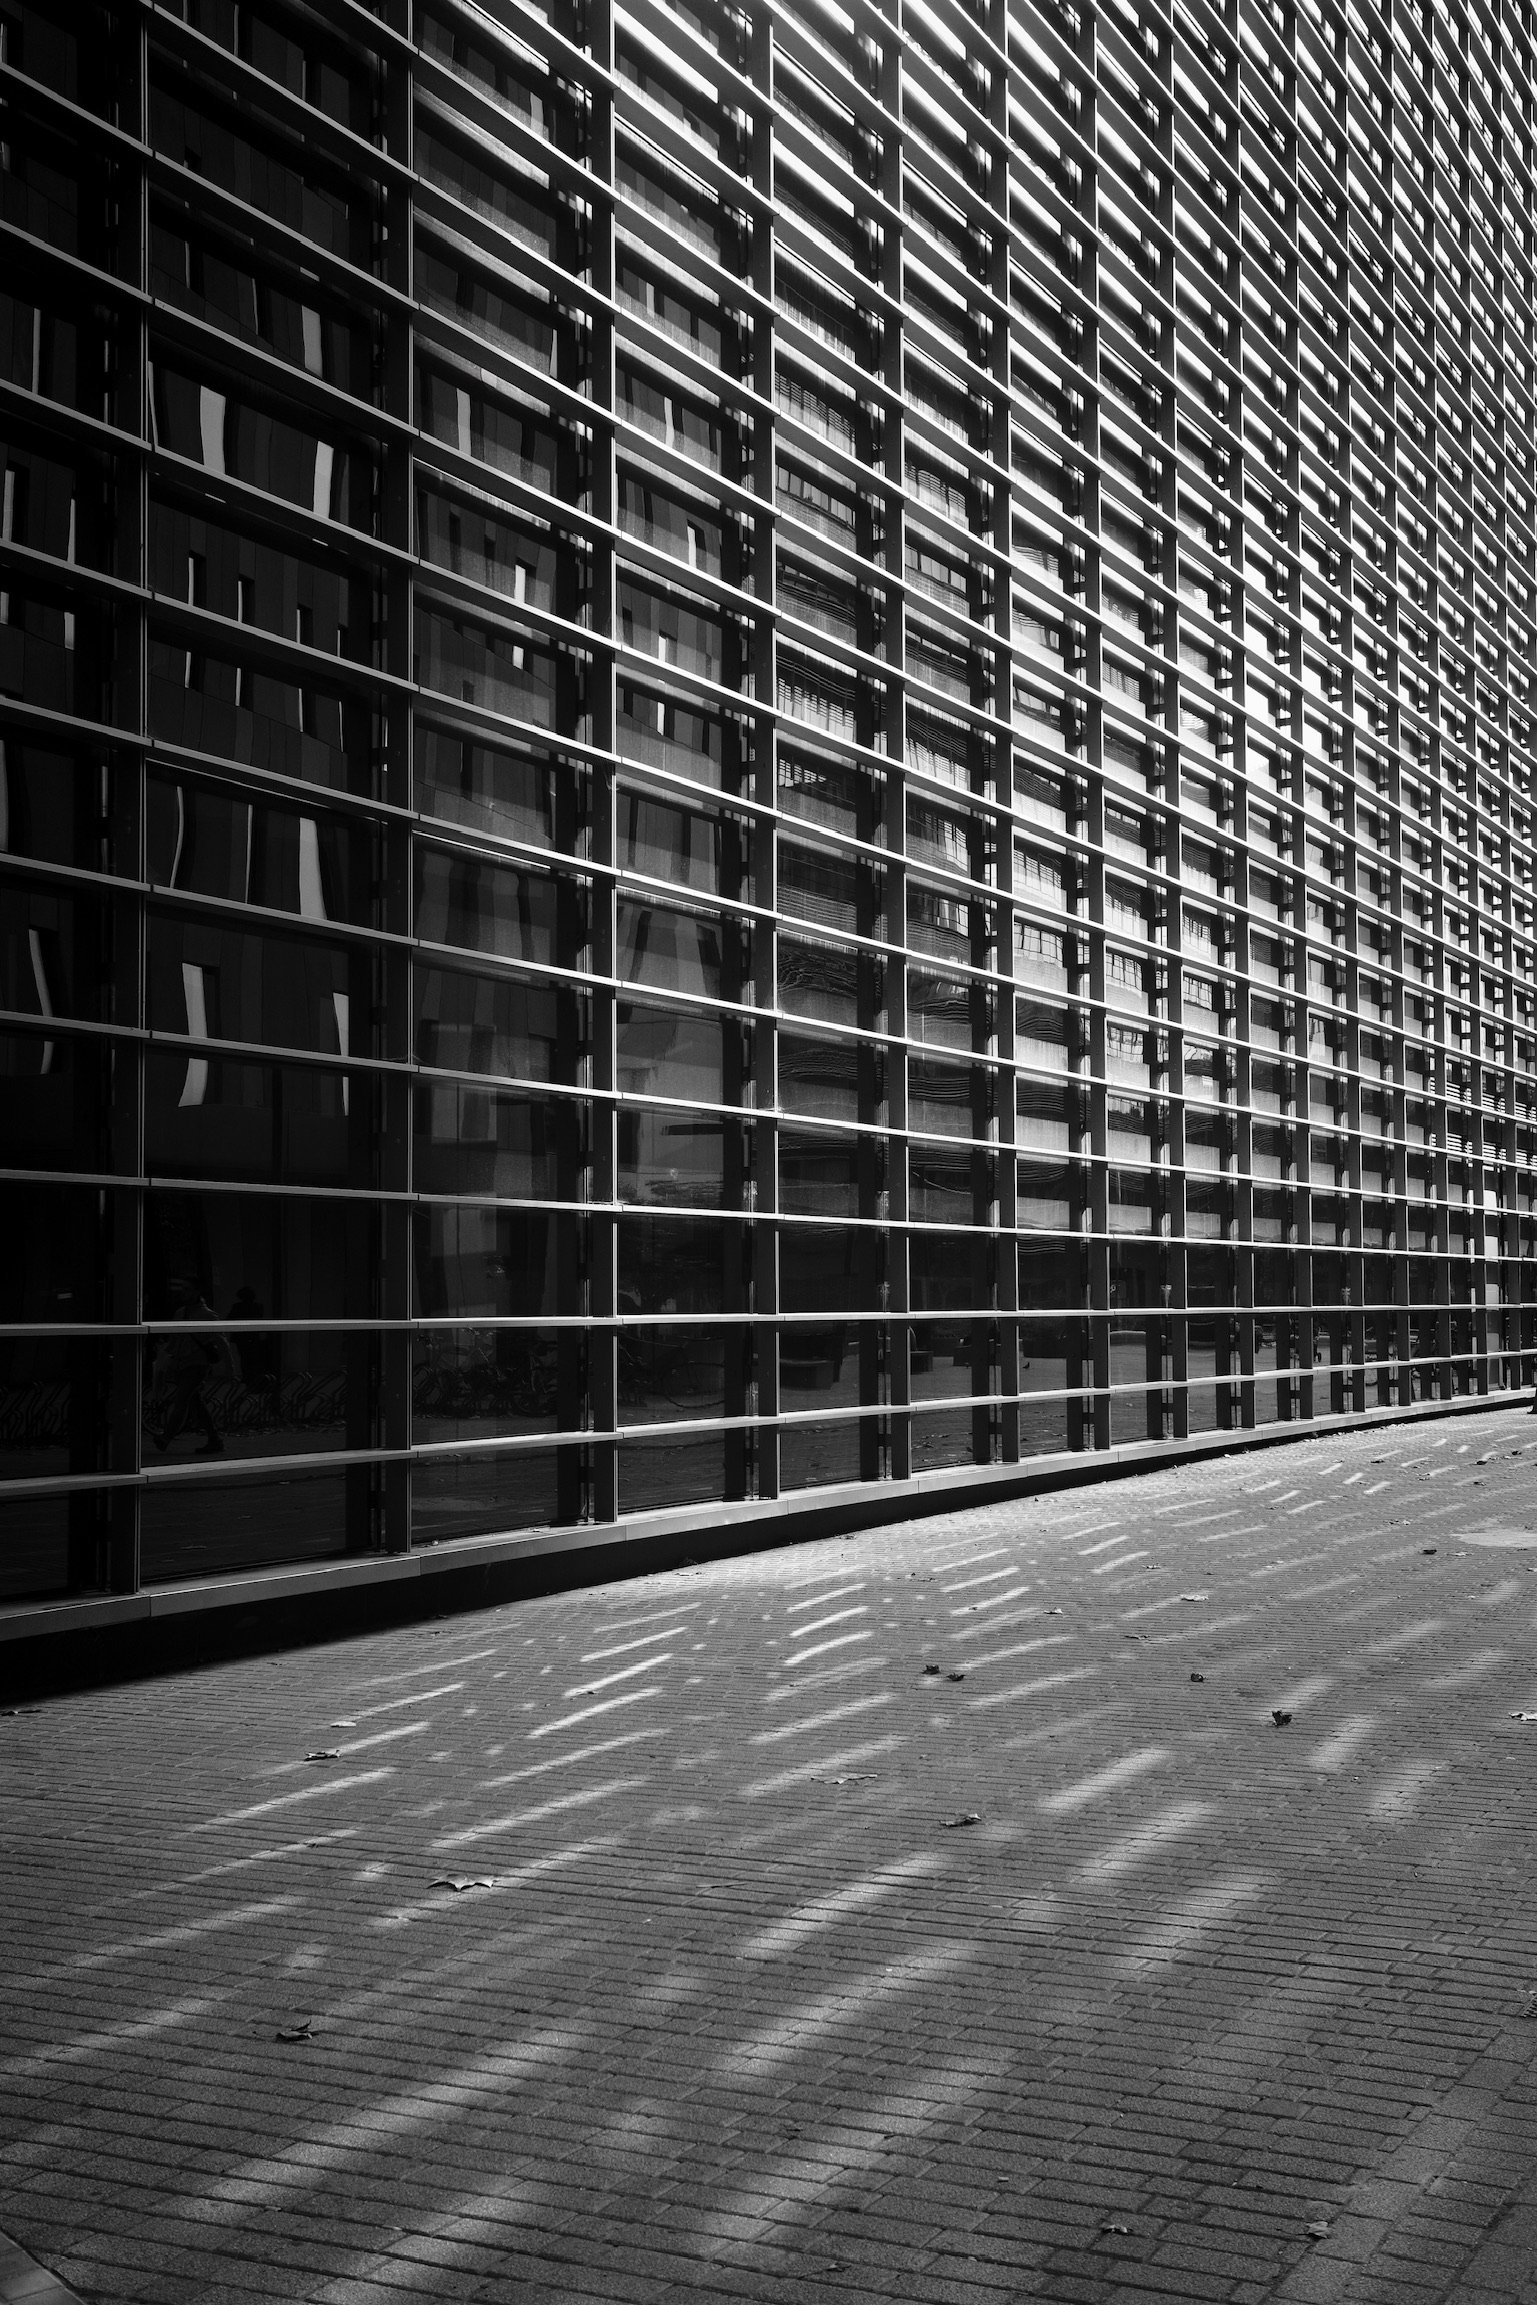 Building with mirror and gird exterior creating slanted grid shadow on the floor. (black and white)